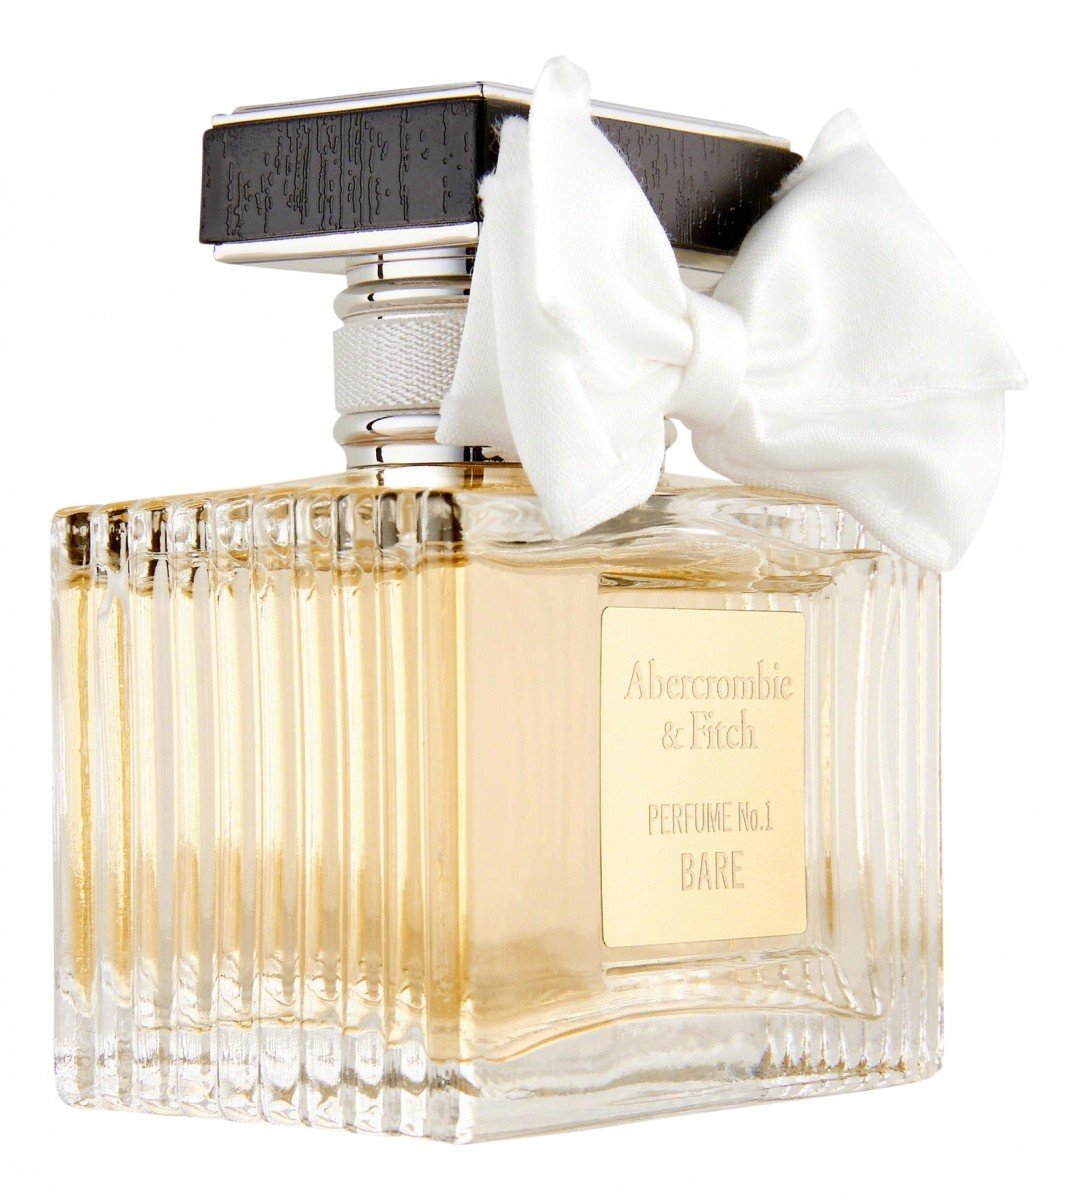 abercrombie and fitch perfume no 1 bare